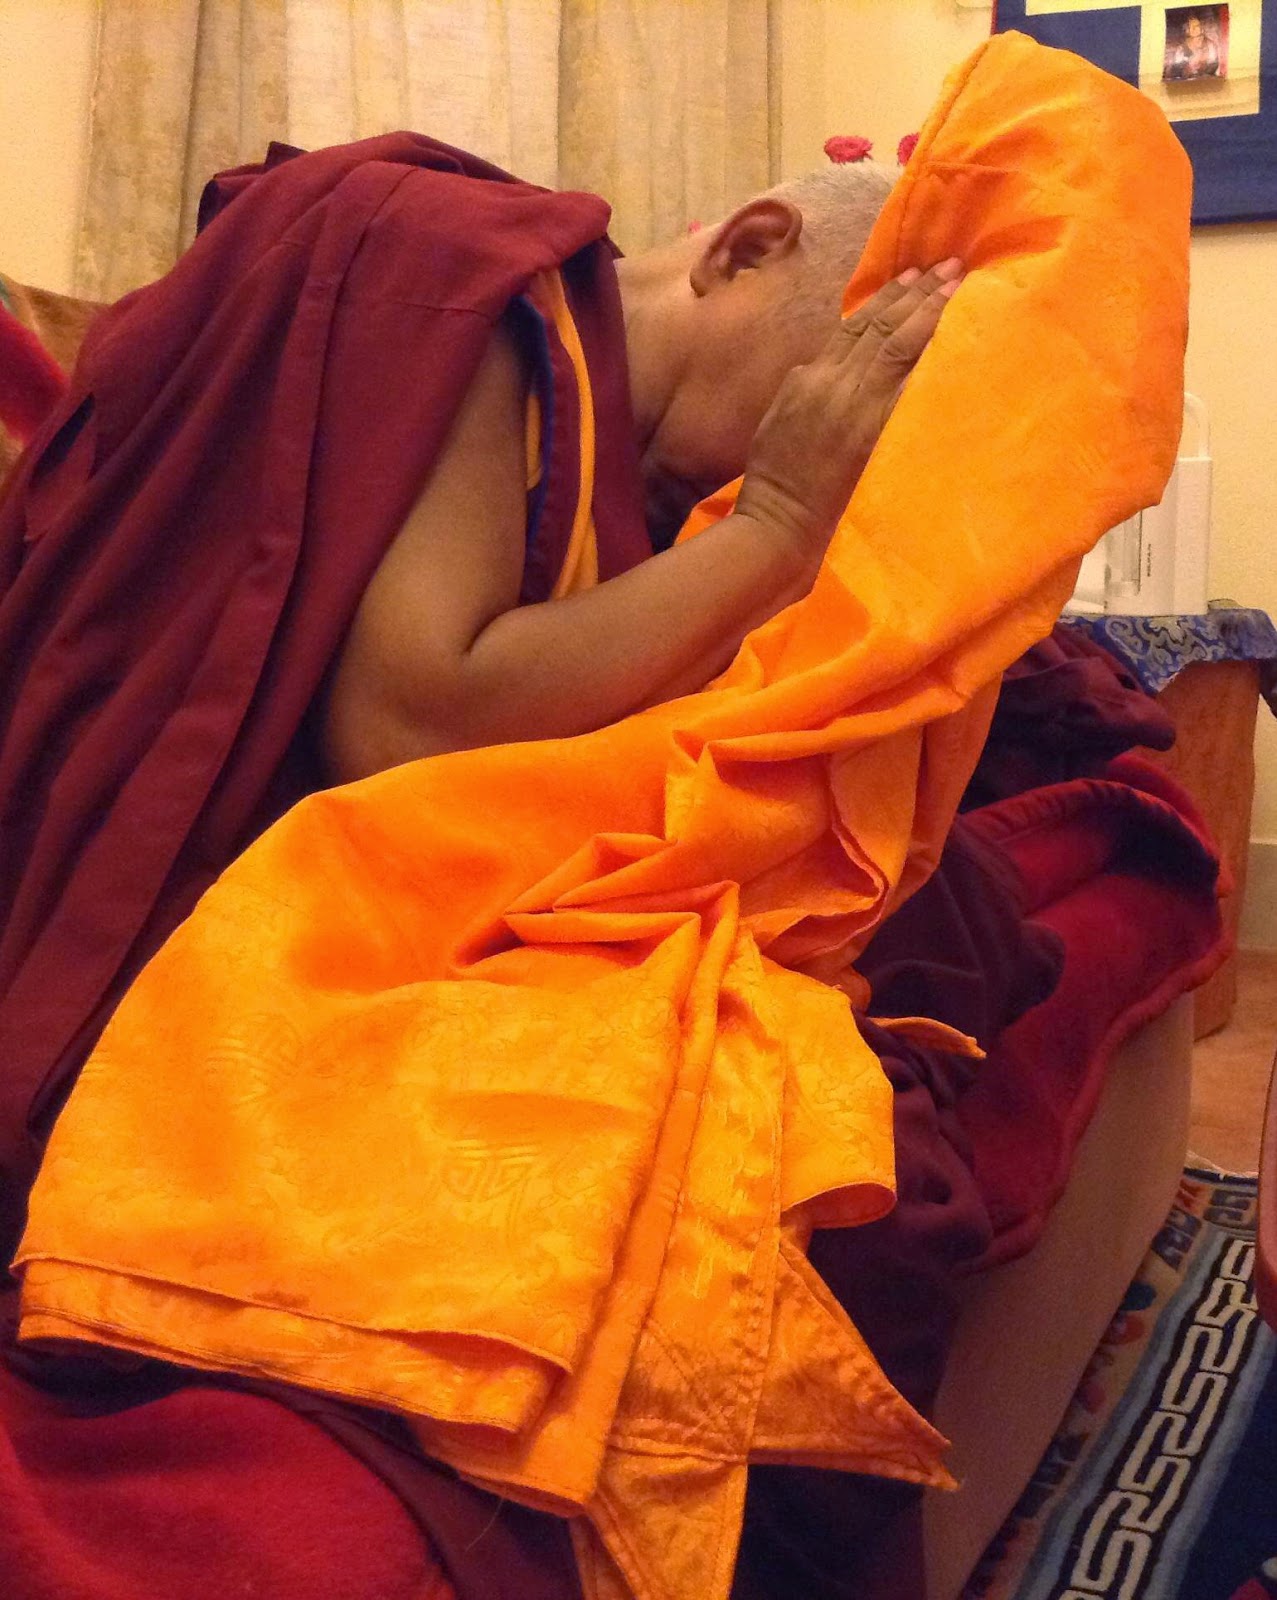 Lama Zopa Rinpoche blessing robes before they are offered to Buddha statue in Mahabodhi Temple, Bodhgaya.